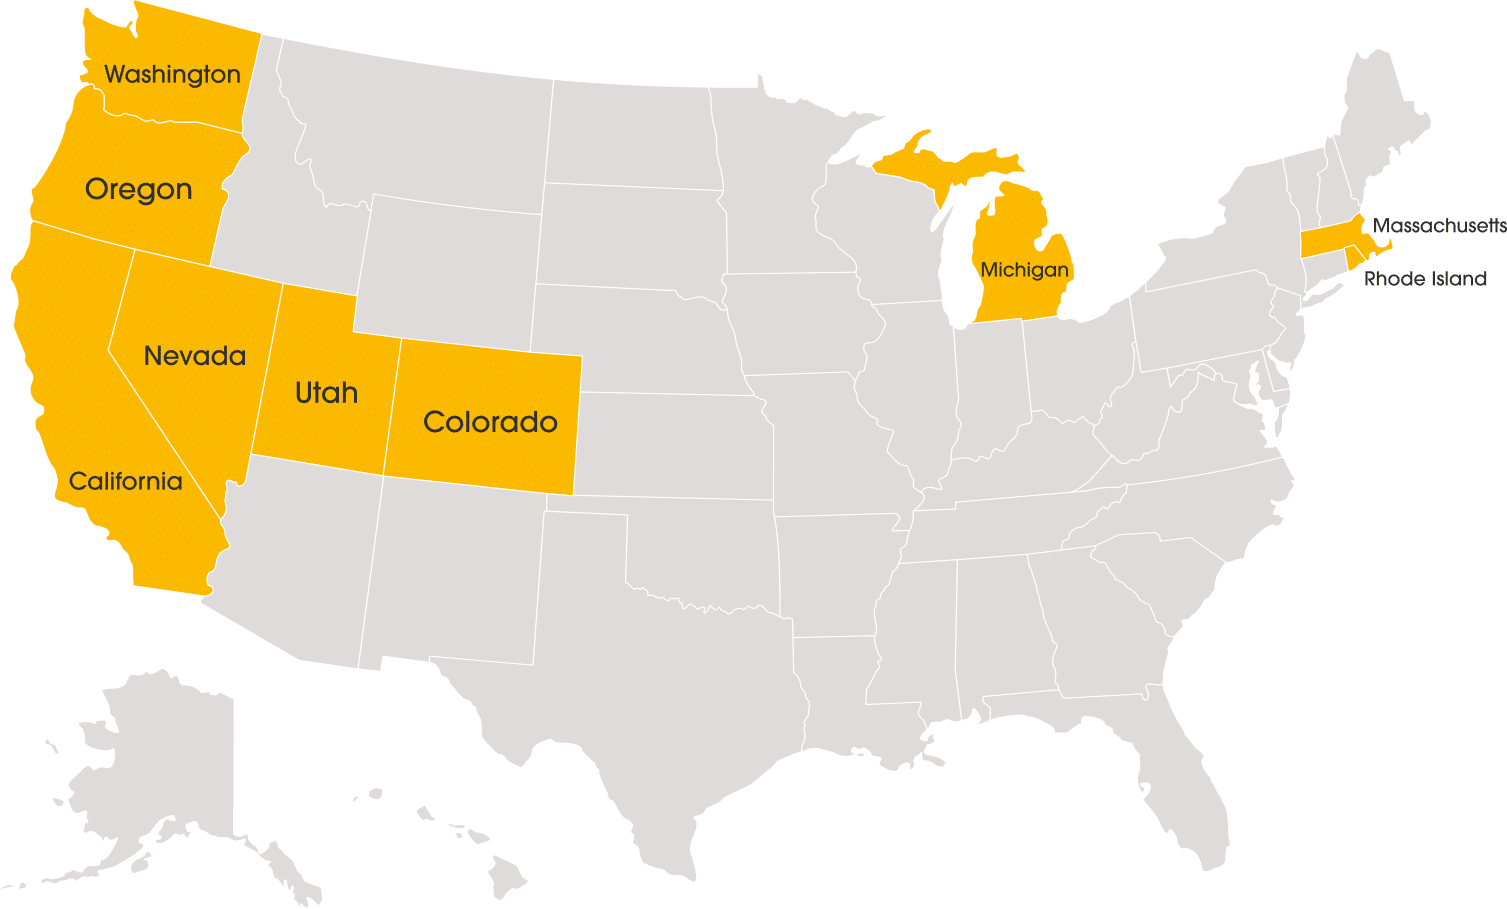 Map of The United States of America with these states highlighted in yellow: California, Colorado, Massachusetts, Michigan, Nevada, Oregon, Rhode Island, Utah, Washington.